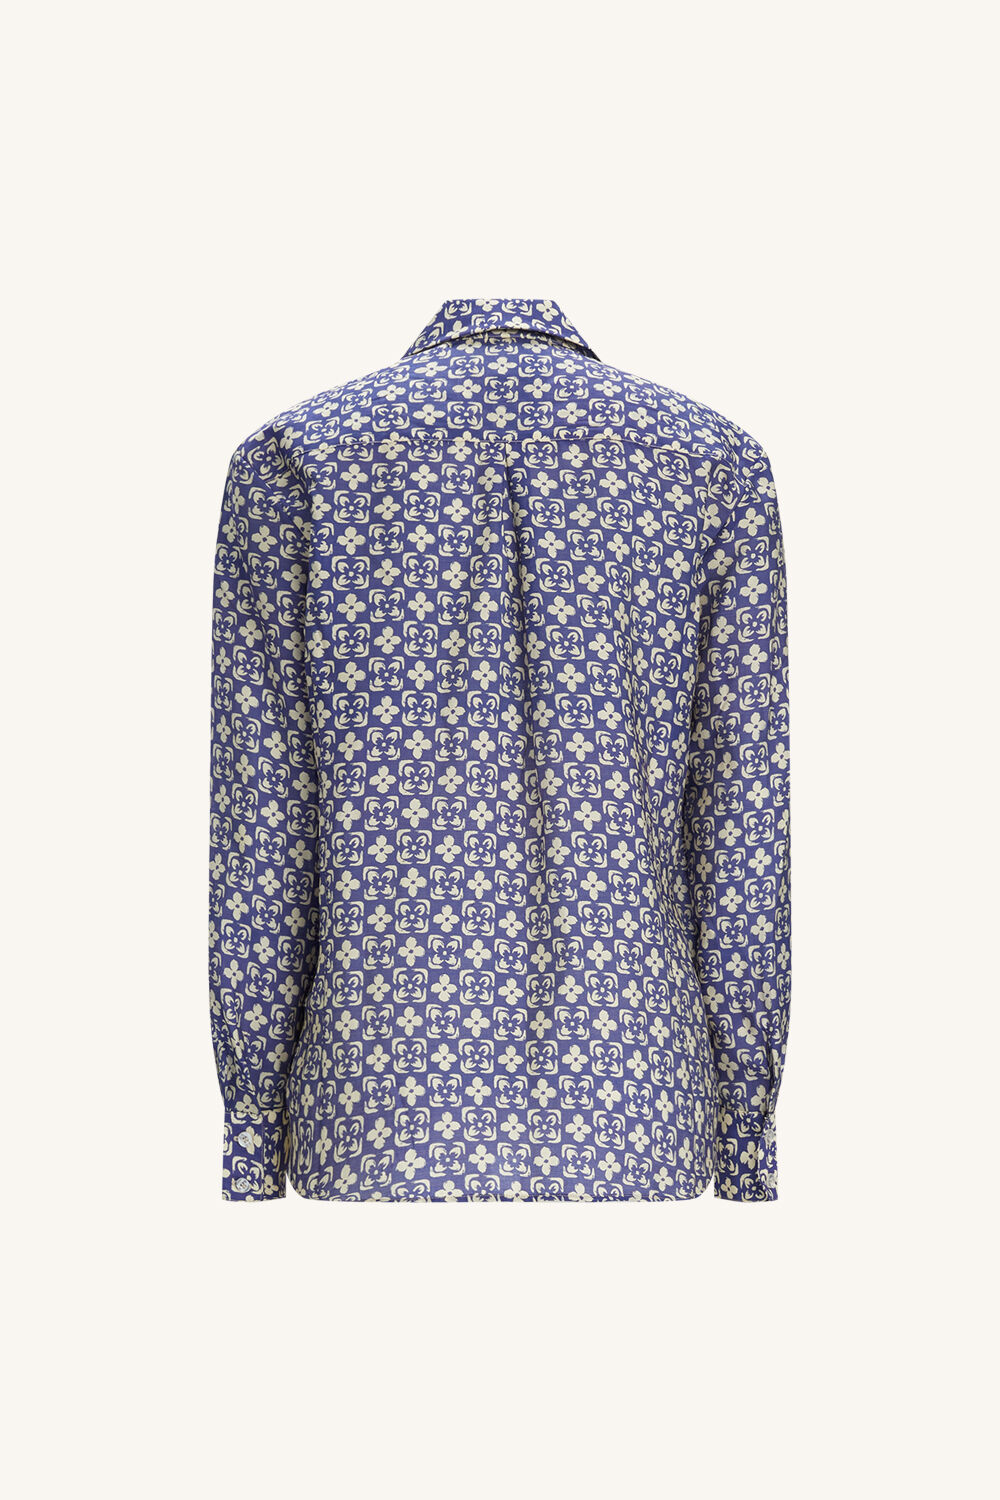 CLASSIC PRINTED COLLAR SHIRT in colour DRESS BLUES